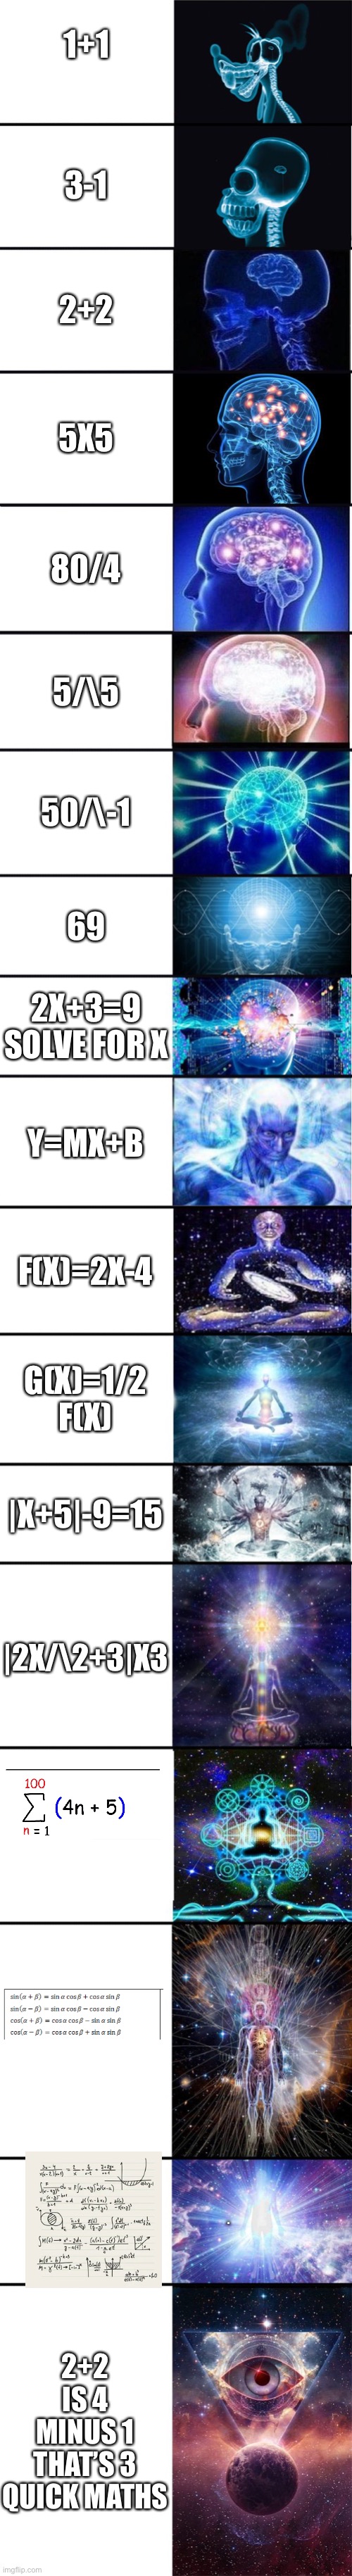 expanding brain: 9001 | 1+1; 3-1; 2+2; 5X5; 80/4; 5/\5; 50/\-1; 69; 2X+3=9 SOLVE FOR X; Y=MX+B; F(X)=2X-4; G(X)=1/2 F(X); |X+5|-9=15; |2X/\2+3|X3; . 2+2 IS 4 MINUS 1 THAT’S 3 QUICK MATHS | image tagged in expanding brain 9001 | made w/ Imgflip meme maker